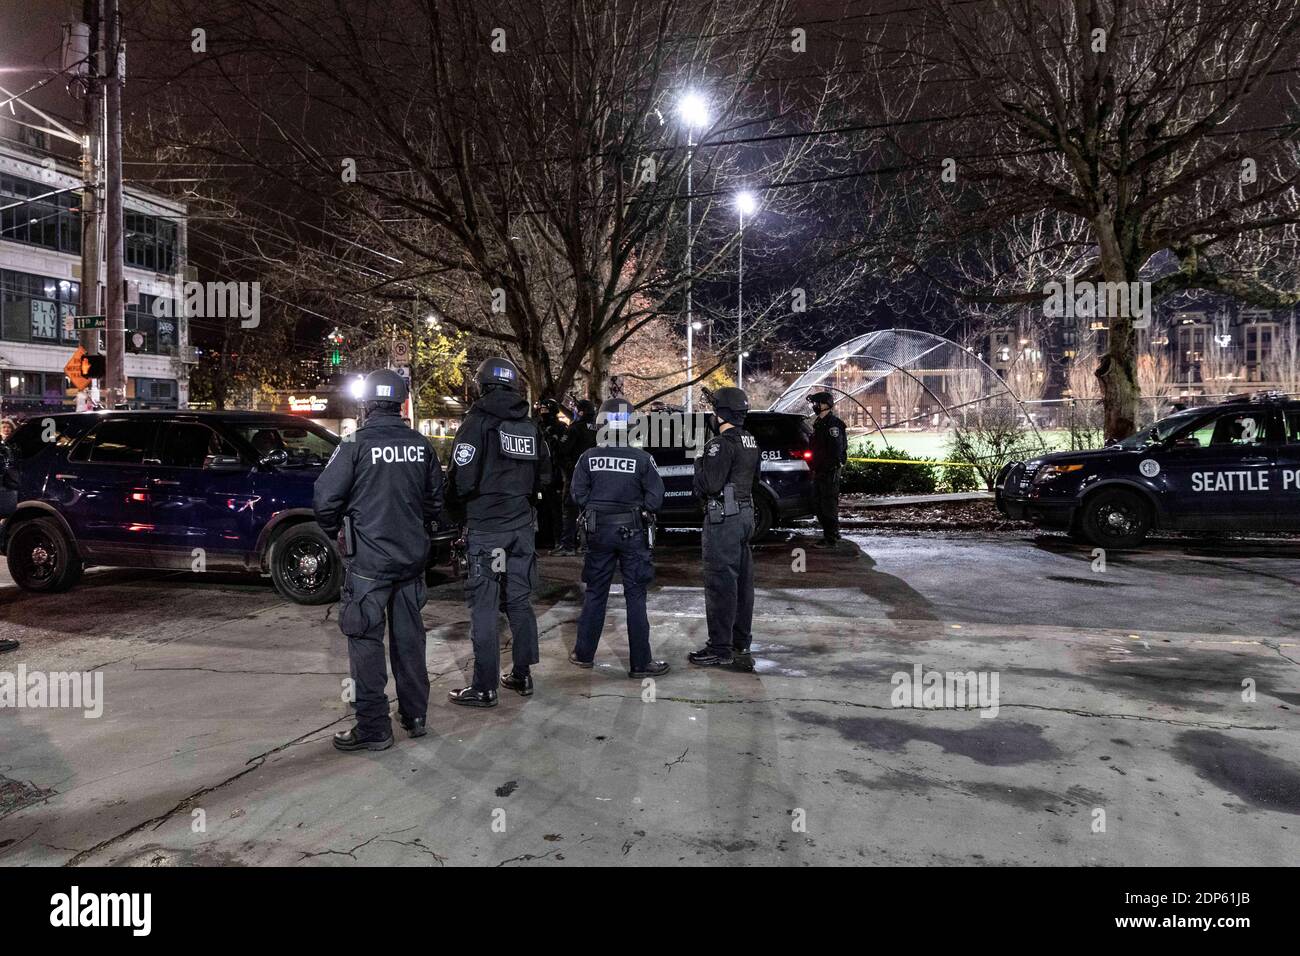 Seattle/King County, Washington, USA. 18th Dec, 2020. The Seattle Police stand guard over night at Cal Anderson Park after the clean up earlier that day. The clean up of the park marks the end of the Capitol Hill Autonomous Zone first established on June 8th 2019 during the Black Livers Matter protest. The area has become an area of crime and violance. Credit: Tom Kirkendall/ZUMA Wire/Alamy Live News Stock Photo